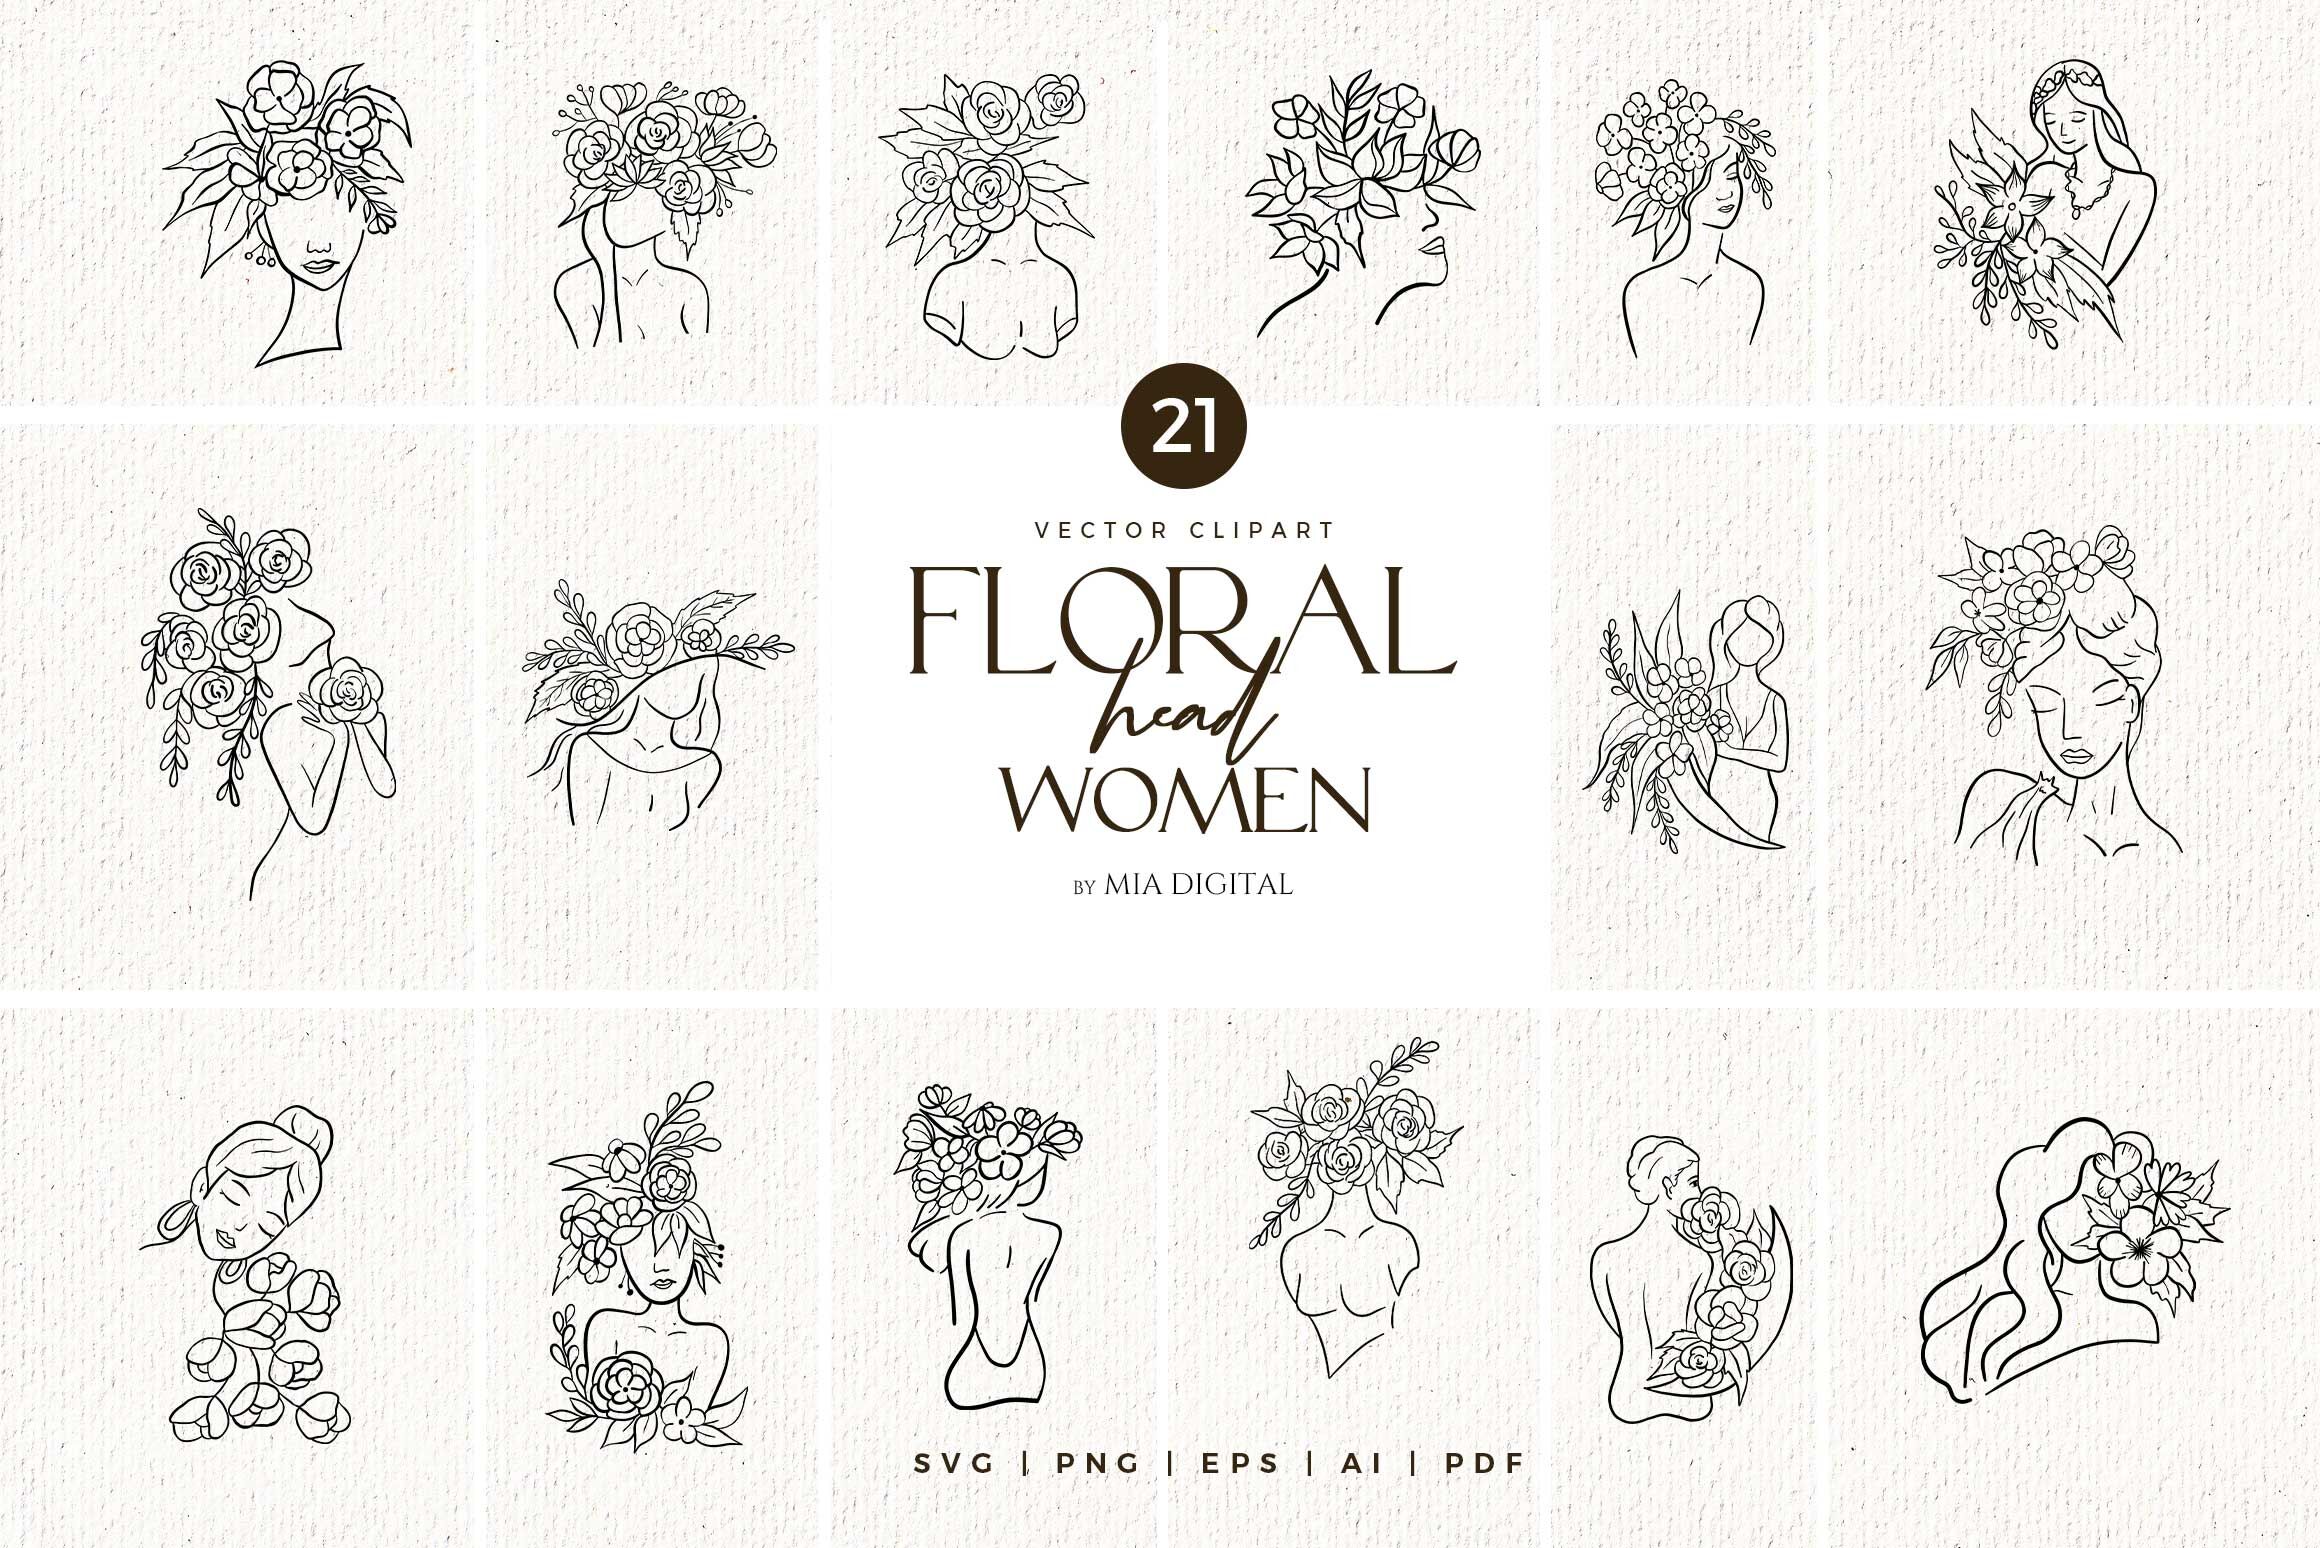 Download Floral Head Women Svg Clip Art Black Line Art Girl With Flowers By Mia Digital Thehungryjpeg Com